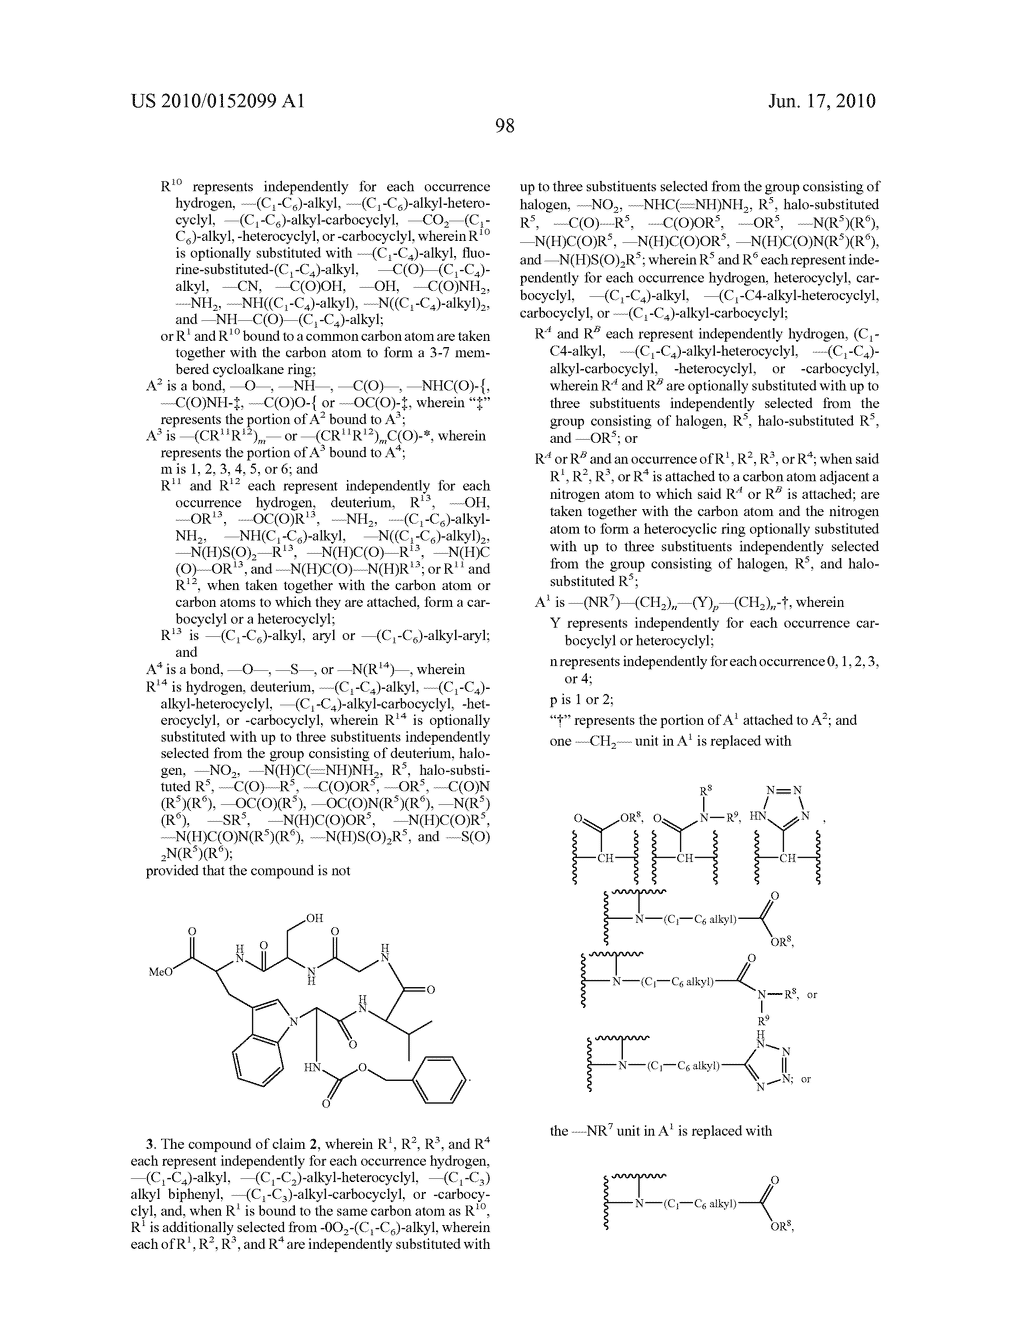 MACROCYCLIC COMPOUNDS FOR INHIBITION OF TUMOR NECROSIS FACTOR ALPHA - diagram, schematic, and image 100